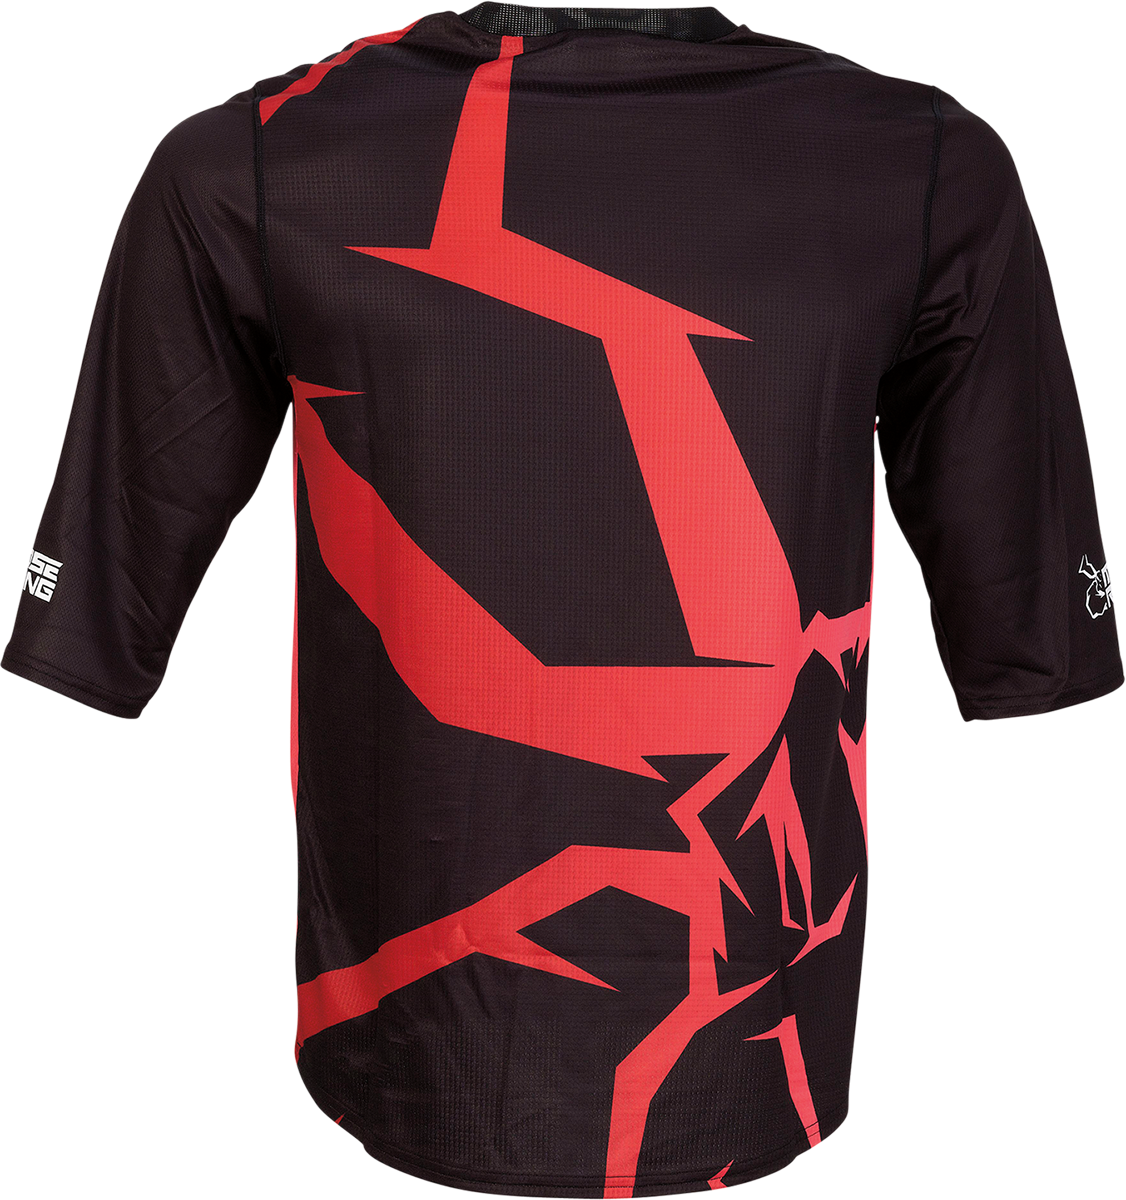 MOOSE RACING MTB Jersey - 3/4 Sleeve - Red - Small 5020-0244